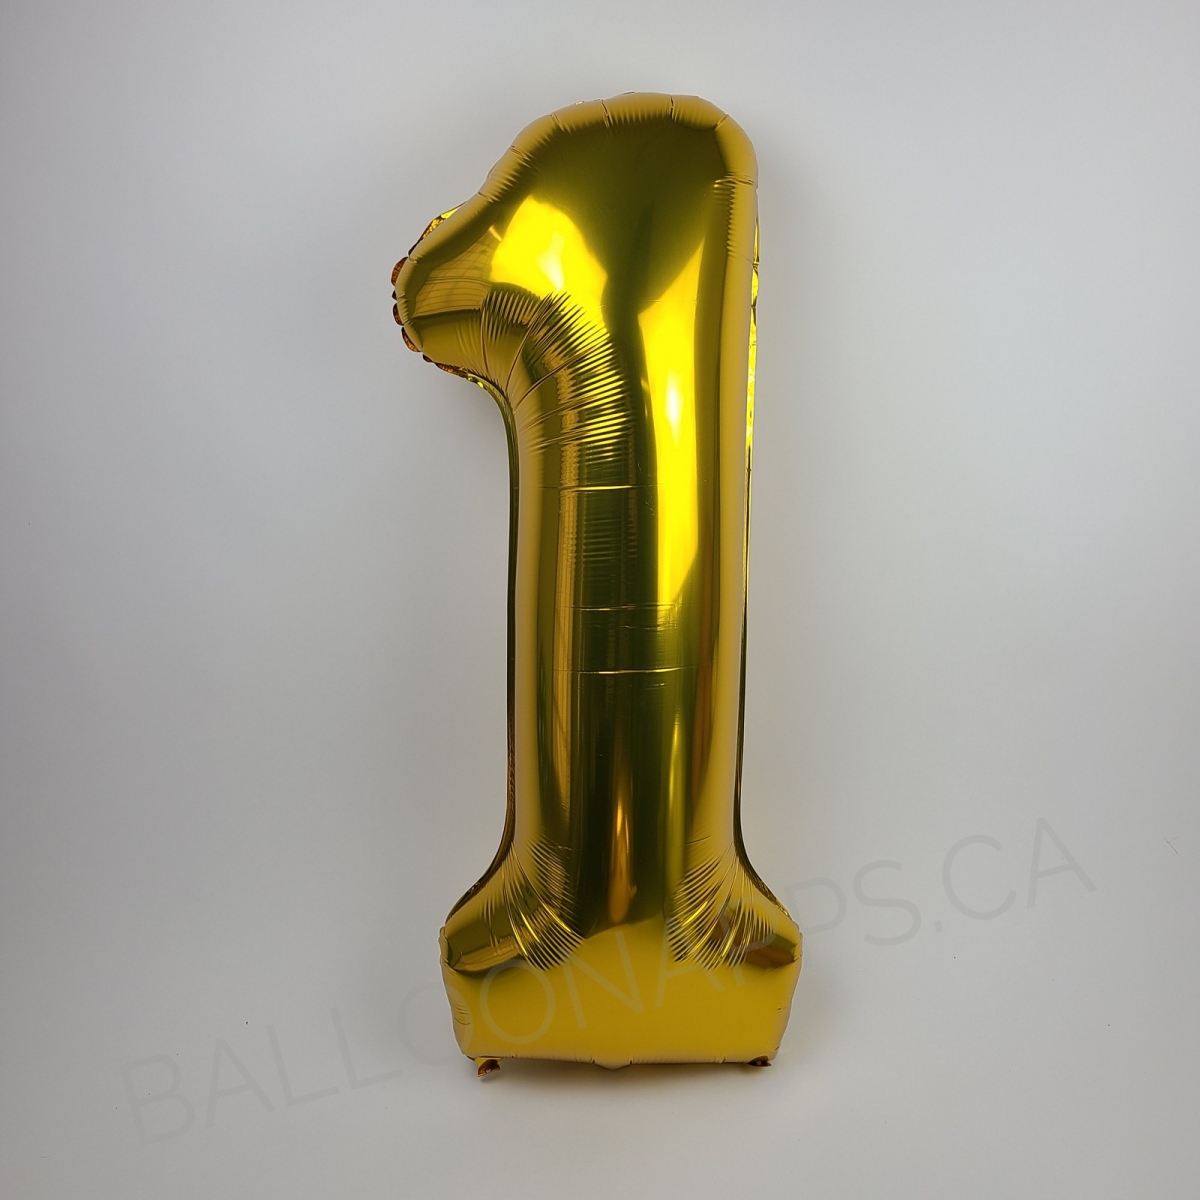 40" Econo Number #1 Gold balloon